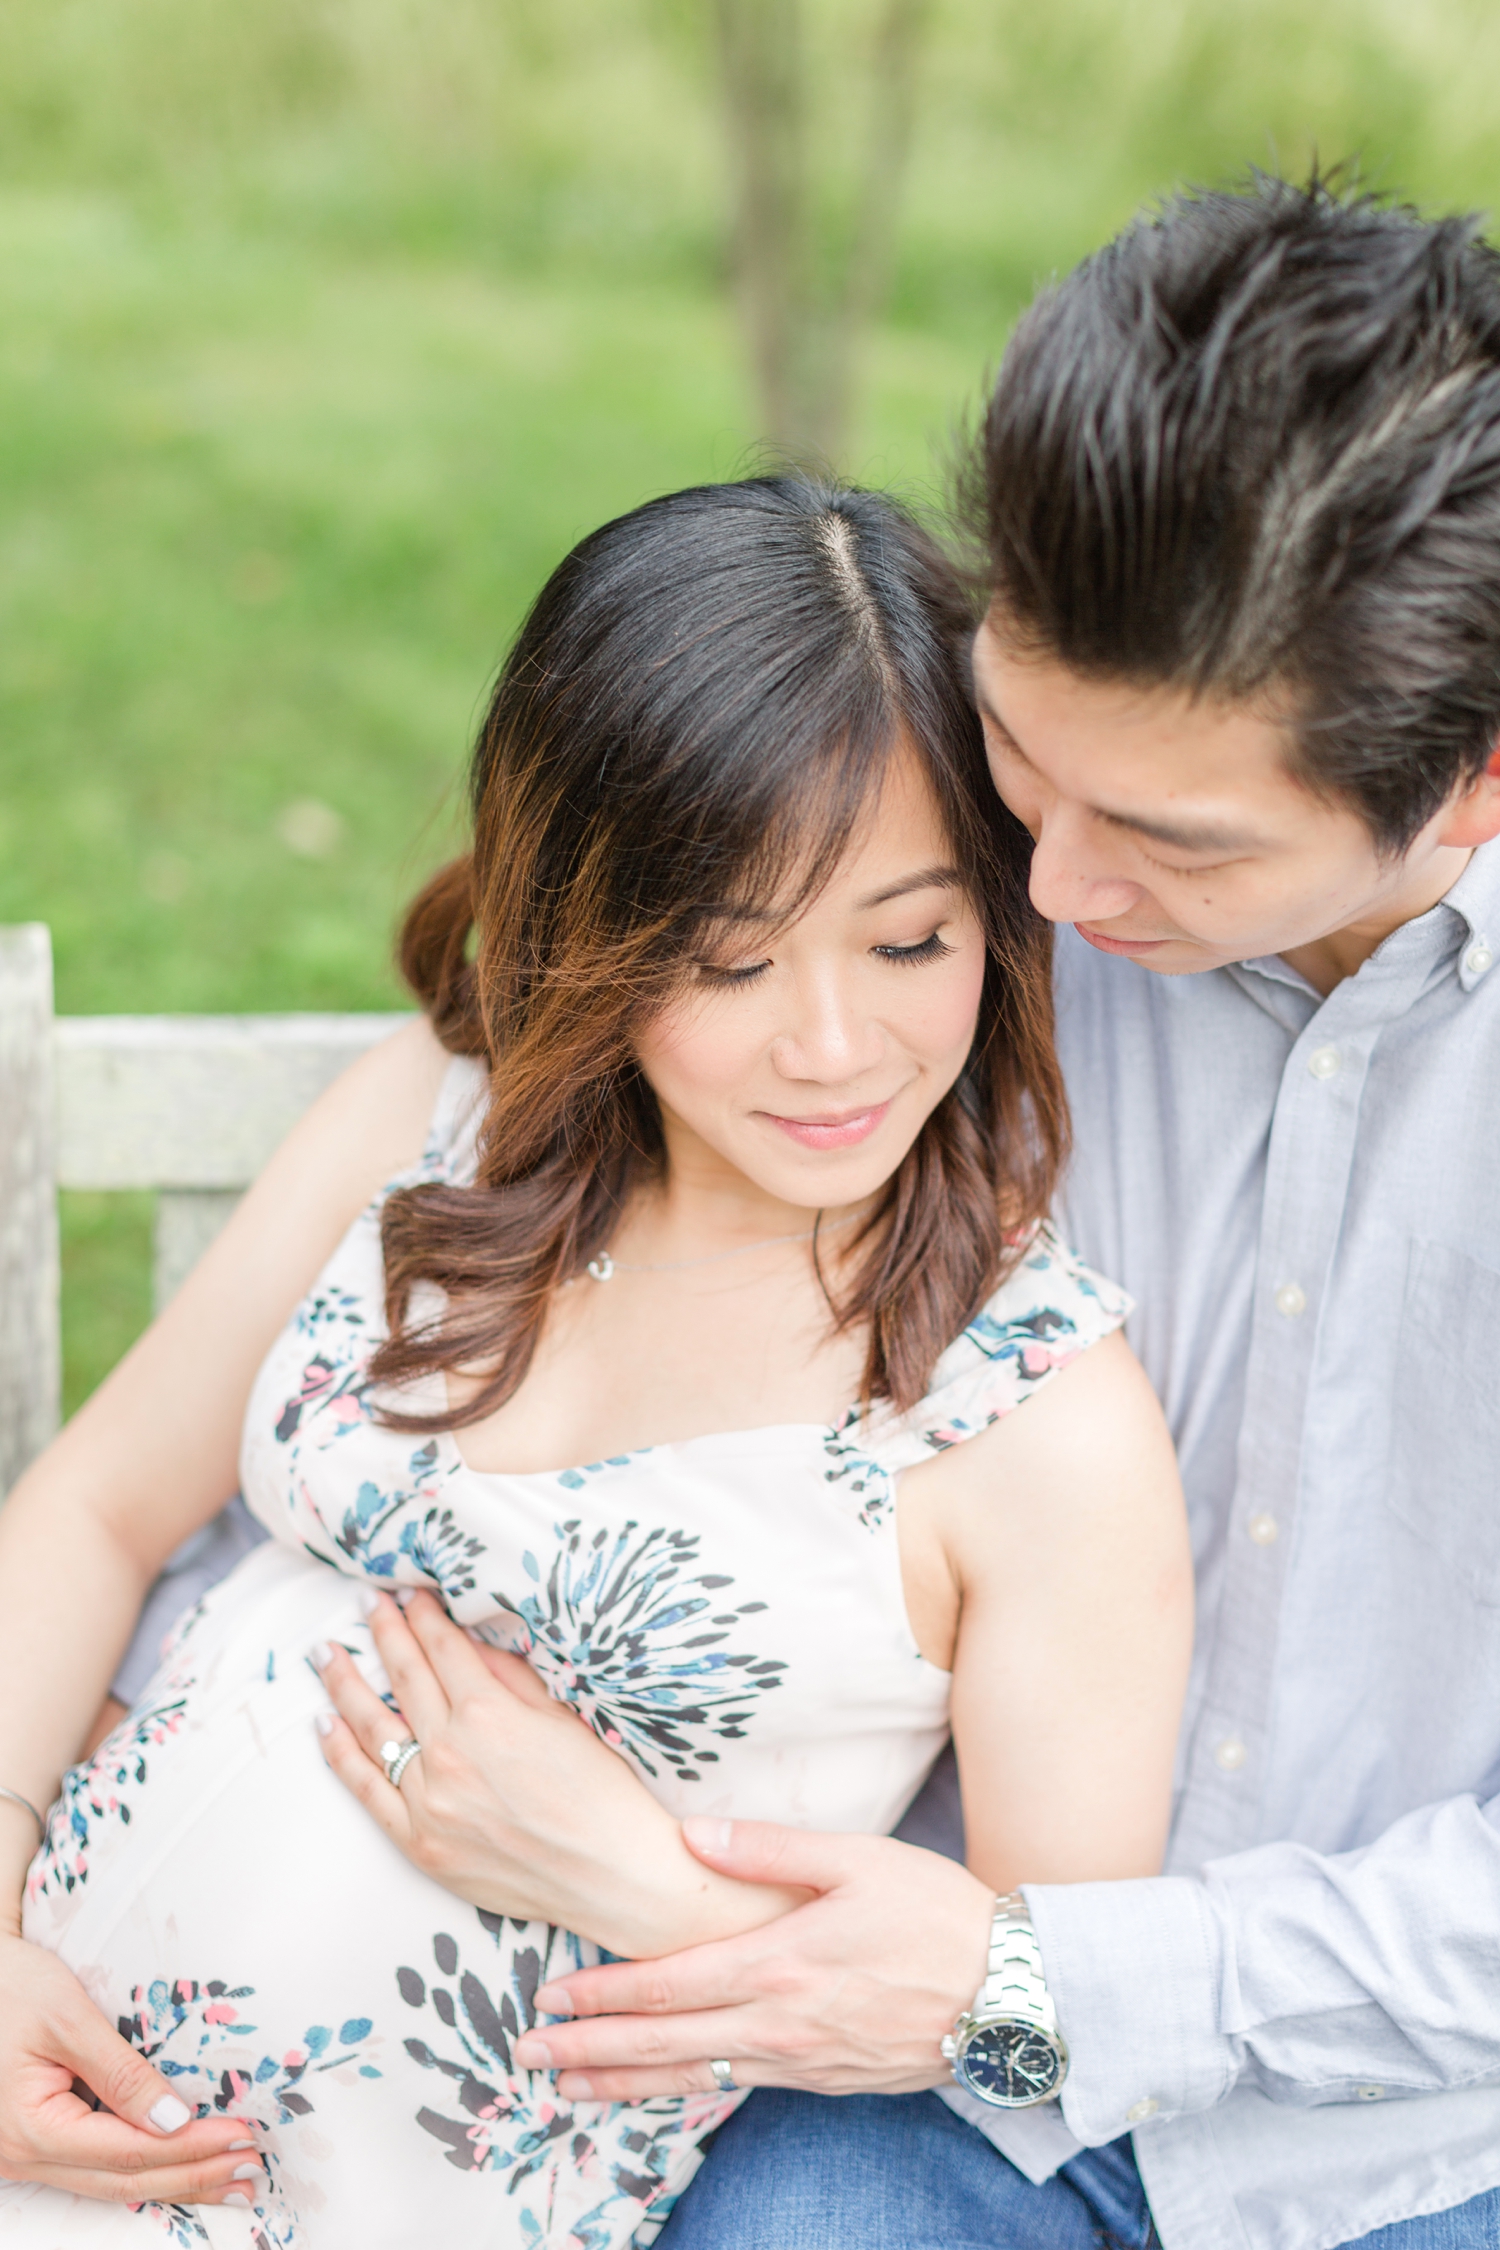  See more from   Elyse &amp; Bryan’s maternity session at Meadowlark Botanical Gardens here  ! 